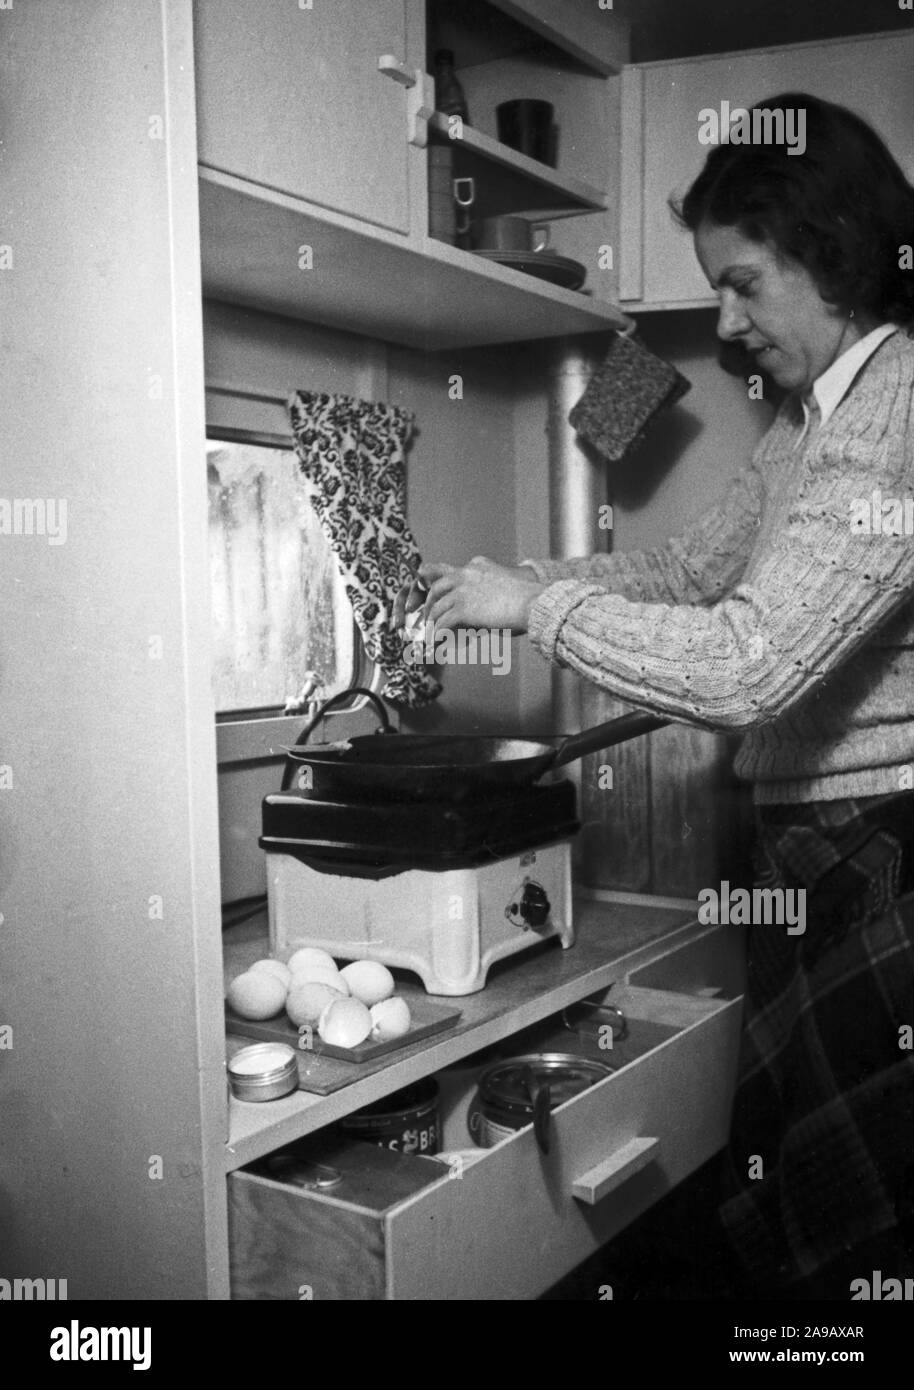 A woman fries eggs on a single burner, Germany 1940s. Stock Photo